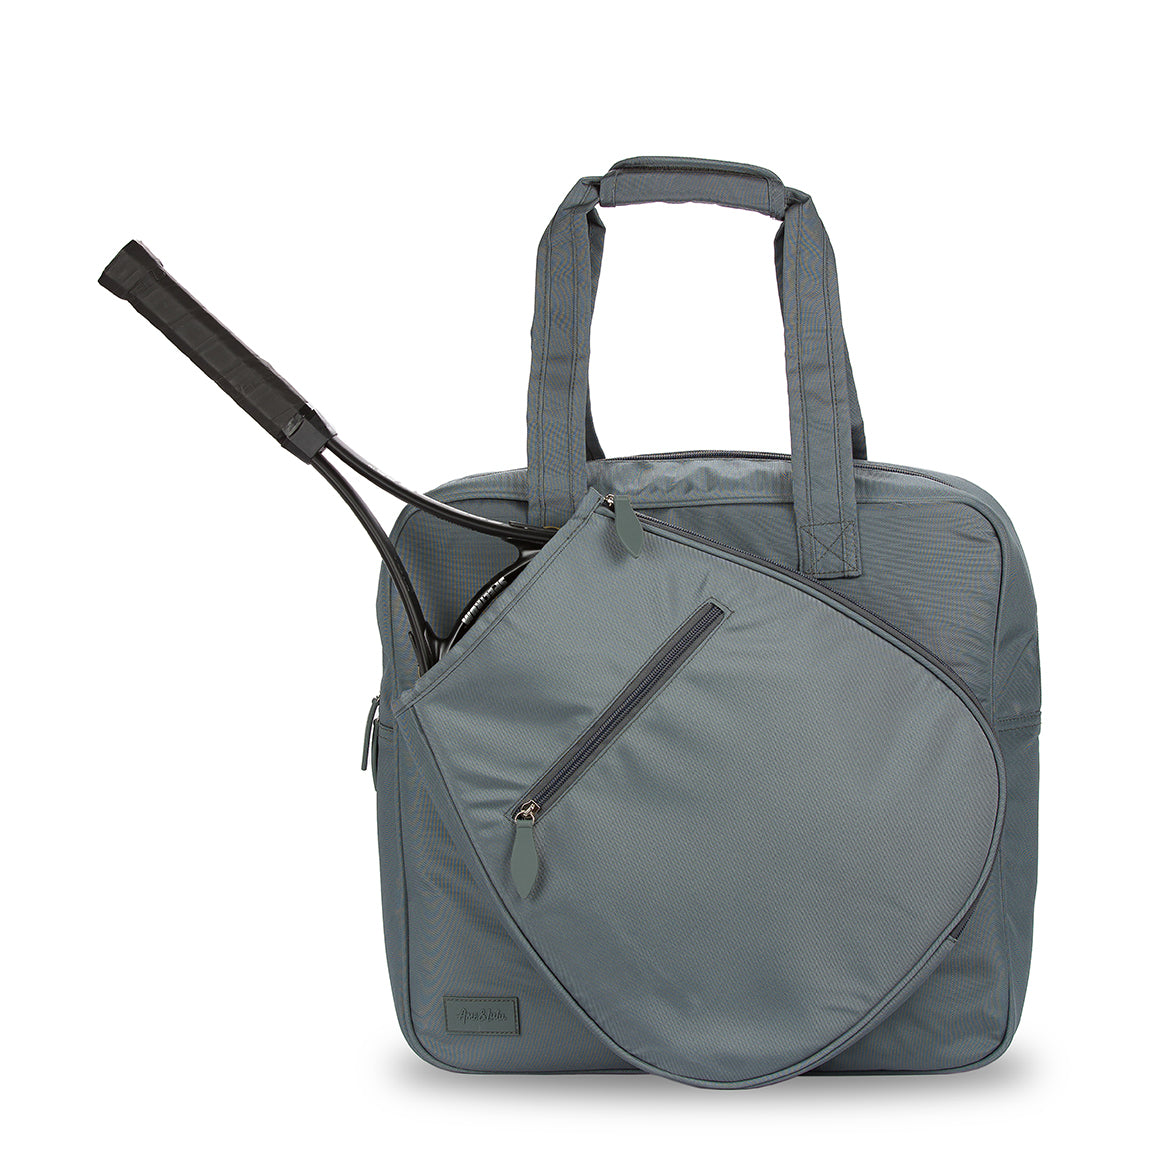 Front view of charcoal grey tennis tote with tennis racquet in front pocket.